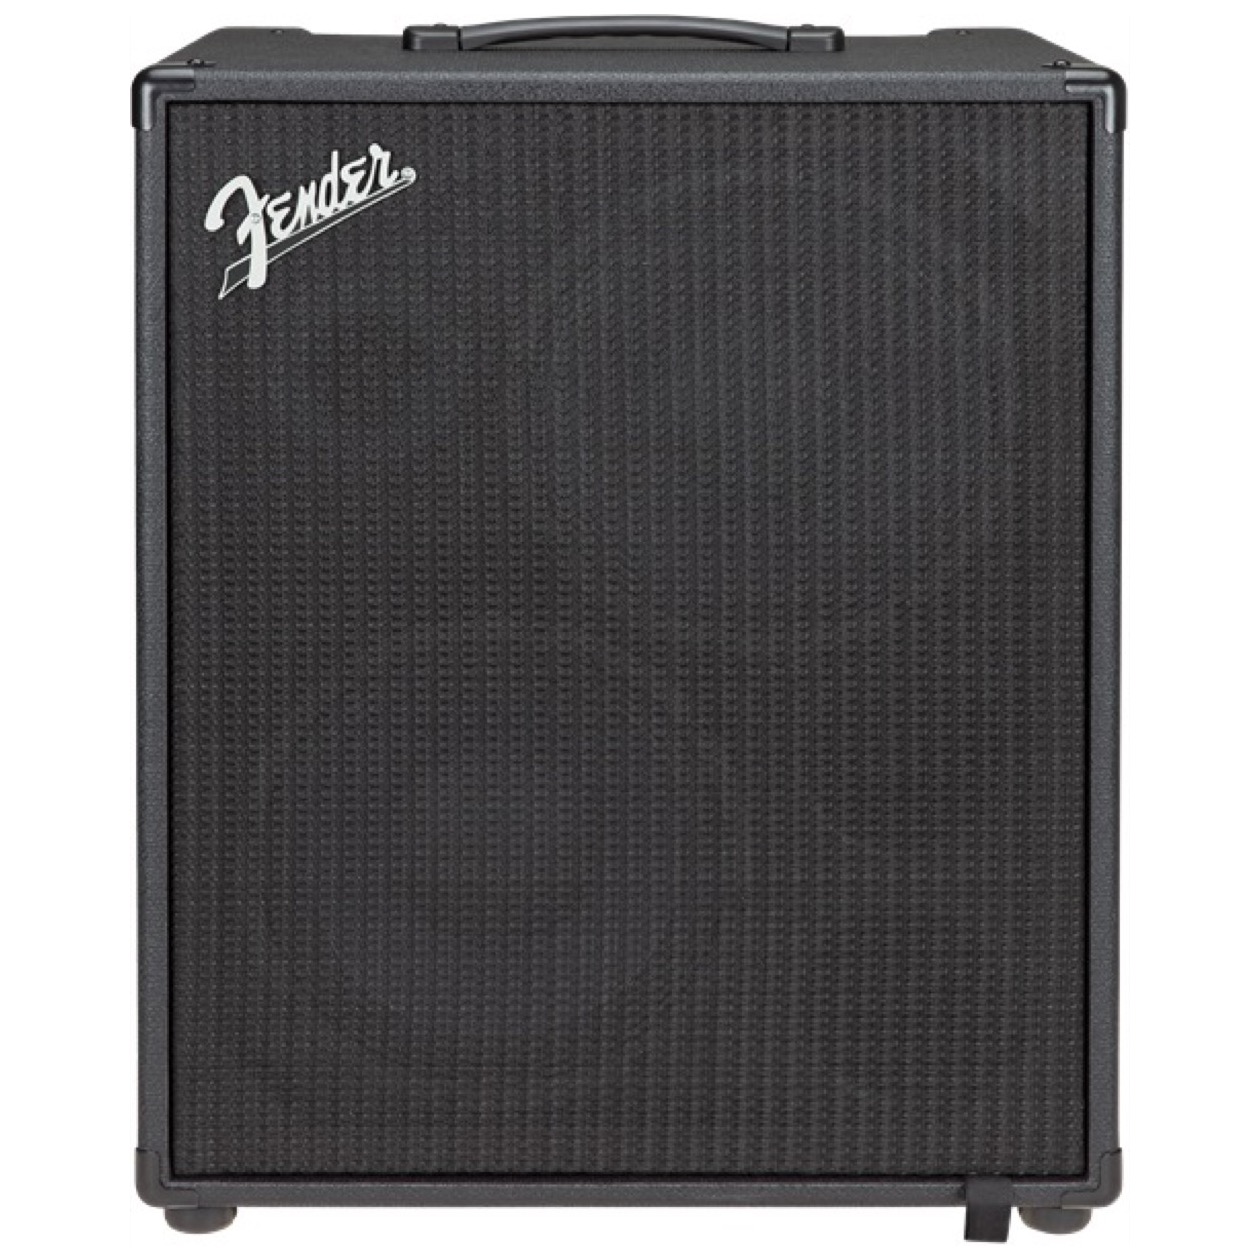 Fender Rumble Stage 800, WiFi Equipped Digital Bass Combo